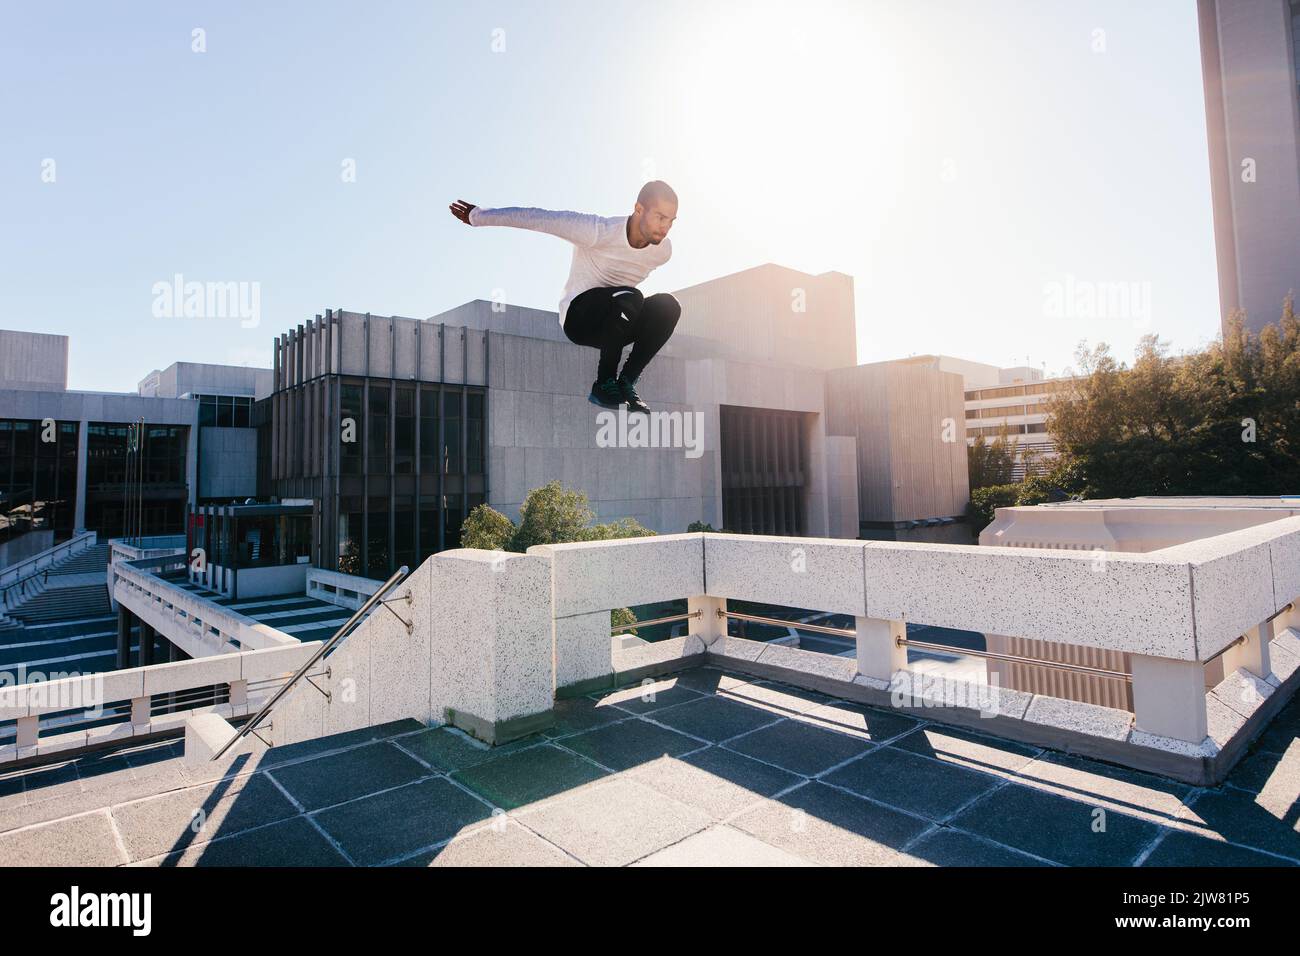 Athletic young man doing parkour tricking and freerunning over urban city background. Young sportsman practicing extreme sport activities outdoors in Stock Photo